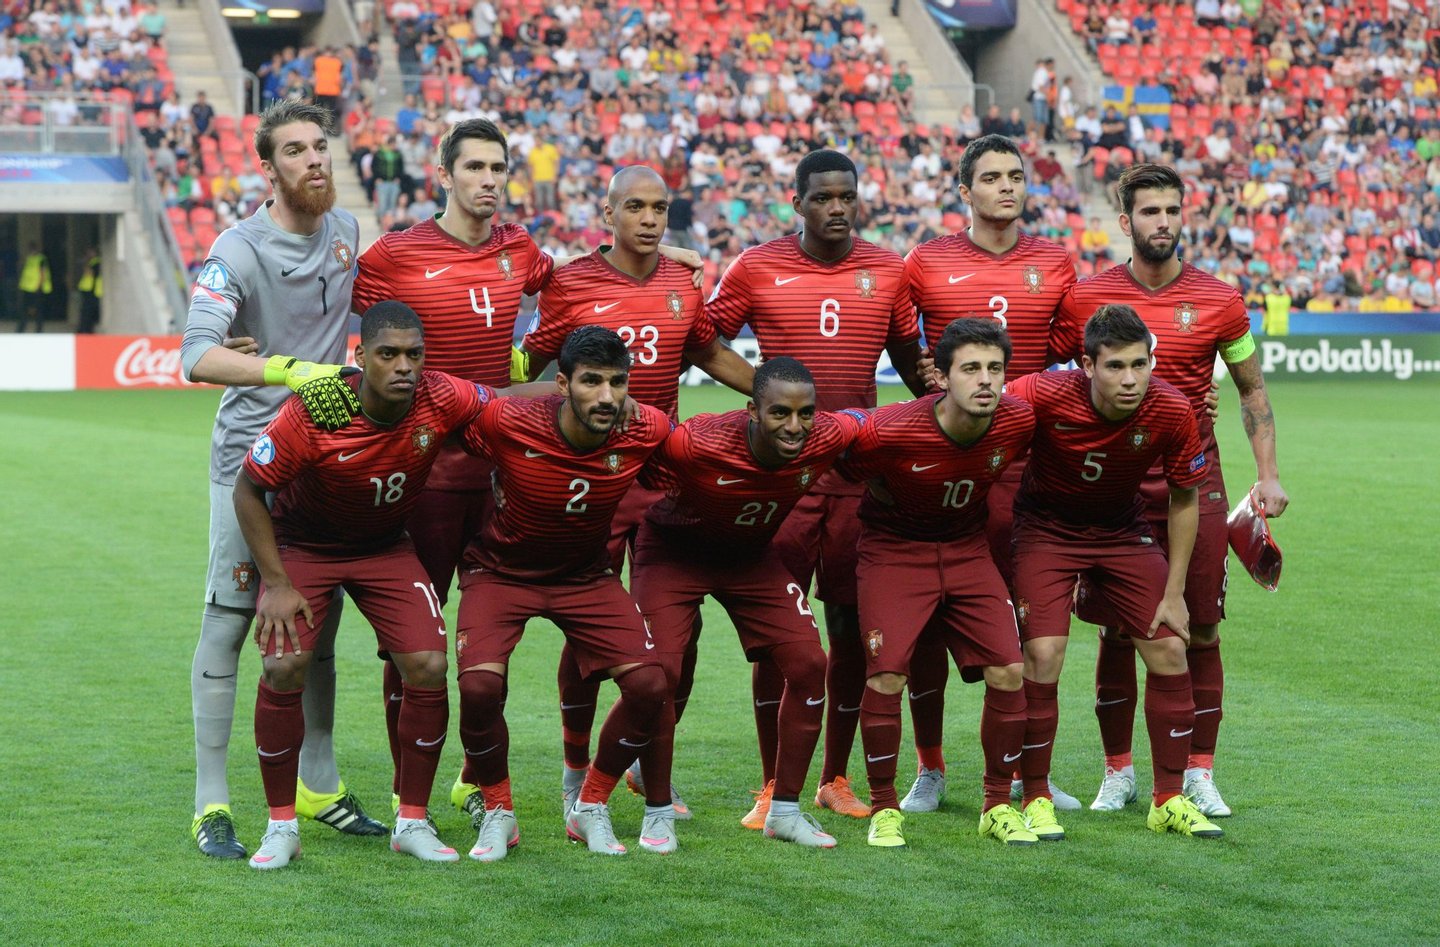 Portugal's team players line up prior to the start of the UEFA Under 21 European Championship 2015 final football match between Sweden and Portugal in Prague on June 30, 2015. AFP PHOTO / MICHAL CIZEK (Photo credit should read MICHAL CIZEK/AFP/Getty Images)